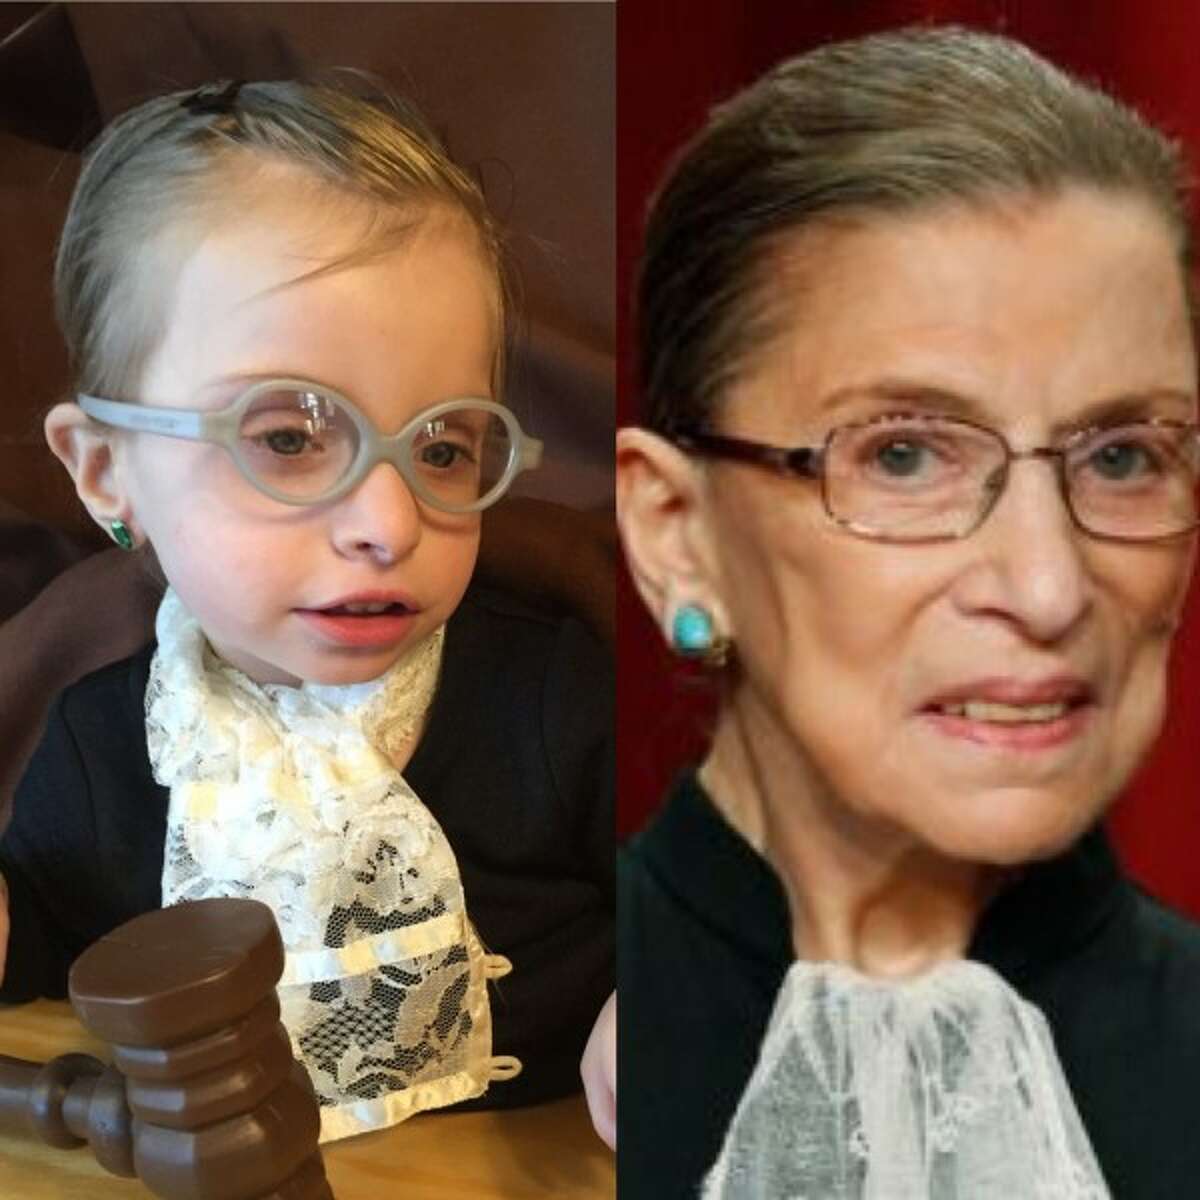 RUTH BADER GINSBURG (2015): Mother Andrea wrote in: “My 2.5 year old daughter, who has a rare chromosomal condition called Pitt Hopkins Syndrome, channeling RBG beautifully …” Topical, sweet and well-executed. I hope Ruth Bader Ginsburg sees this, and appreciates the good company she’s in.